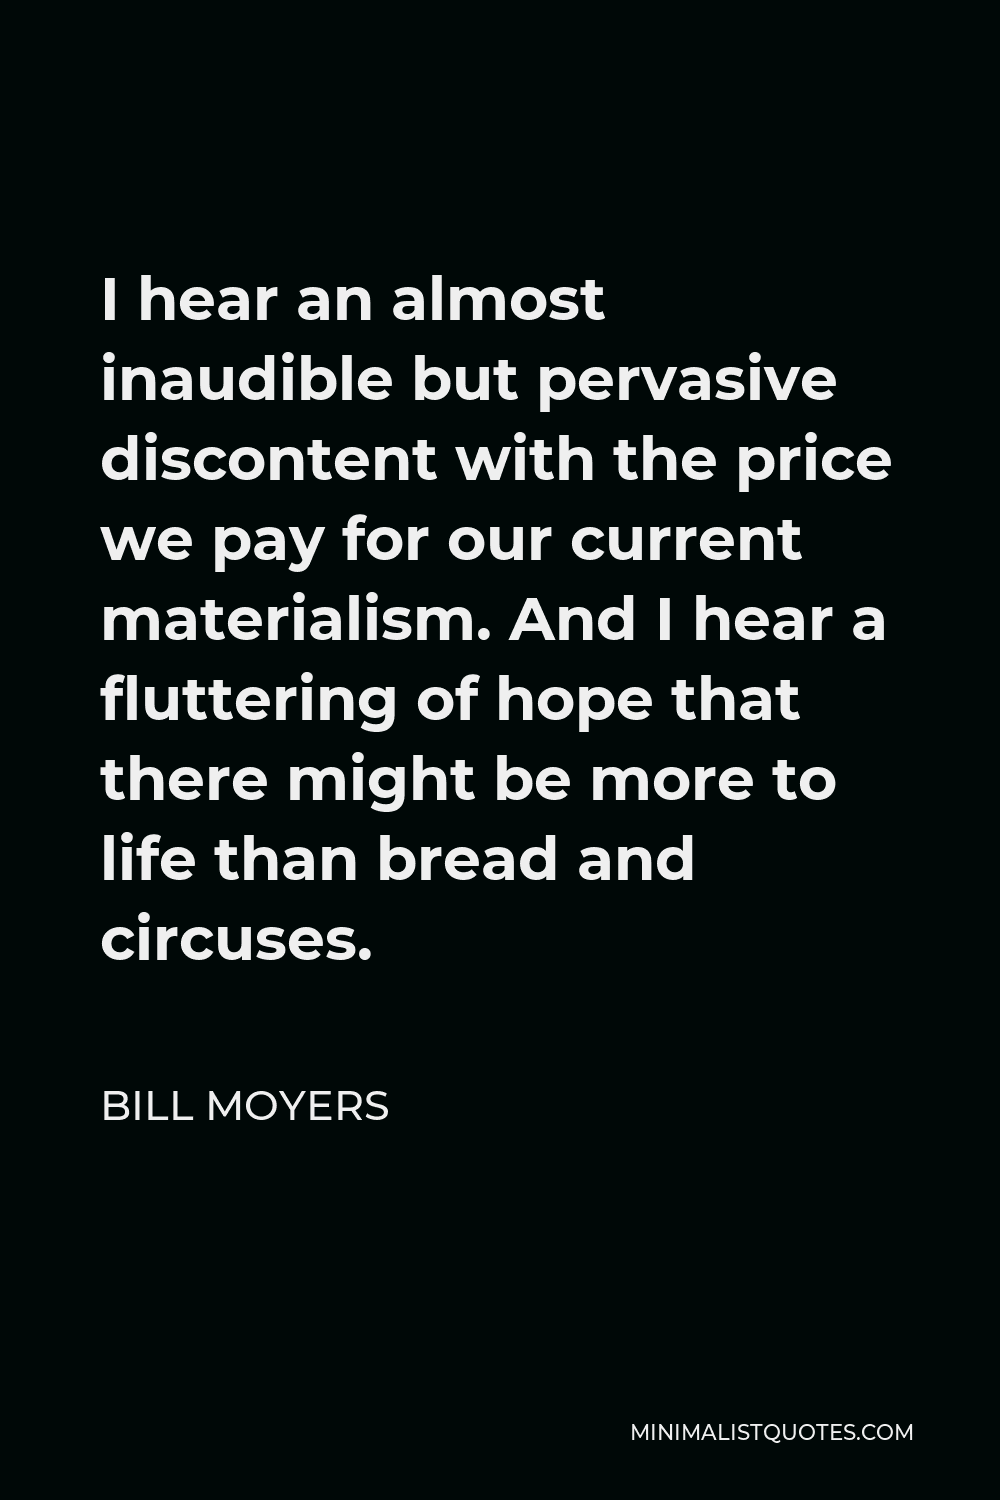 Bill Moyers Quote - I hear an almost inaudible but pervasive discontent with the price we pay for our current materialism. And I hear a fluttering of hope that there might be more to life than bread and circuses.